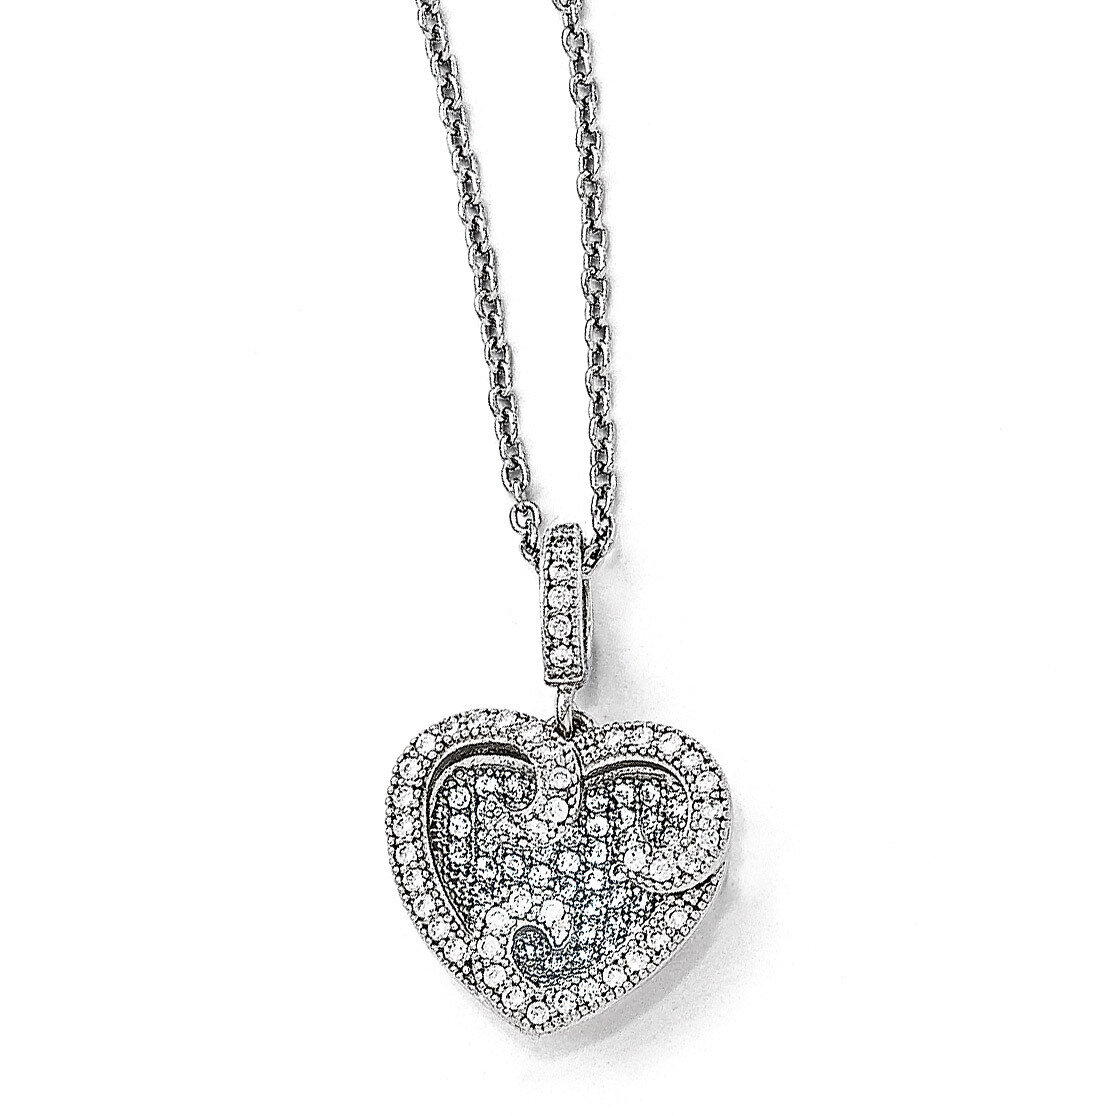 Heart Necklace Sterling Silver & Cubic Zirconia Polished QMP132-18